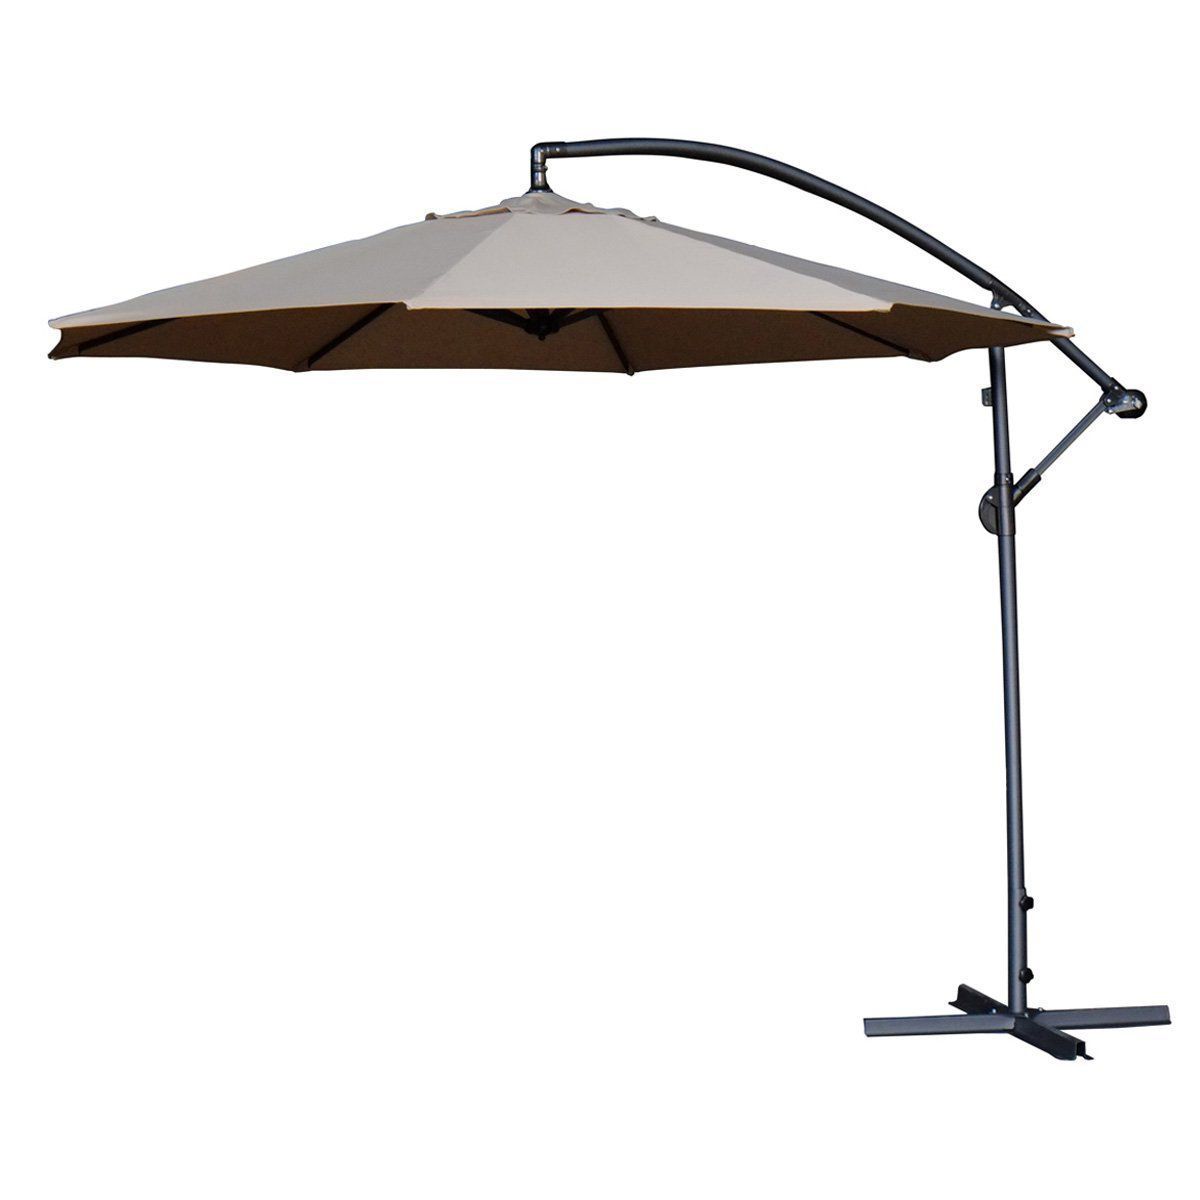 Jaelynn Cantilever Umbrellas With Best And Newest Irven 10' Cantilever Umbrella (View 19 of 20)